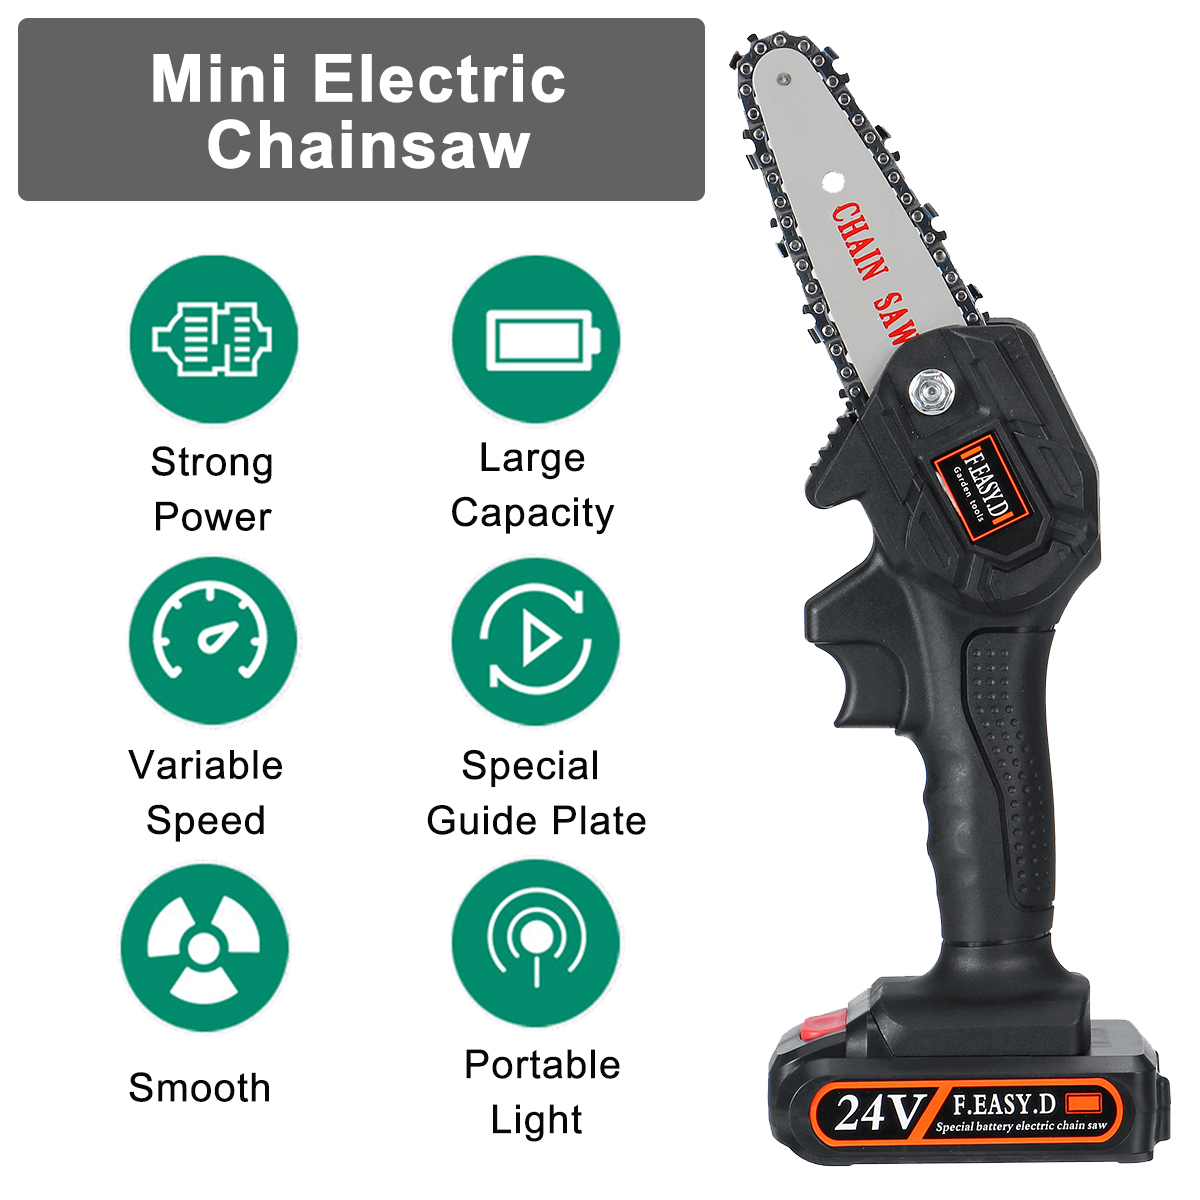 24V-550W-Rechargeable-Mini-Electric-Chainsaw-Handheld-Wood-Pruning-Saw-1791168-2